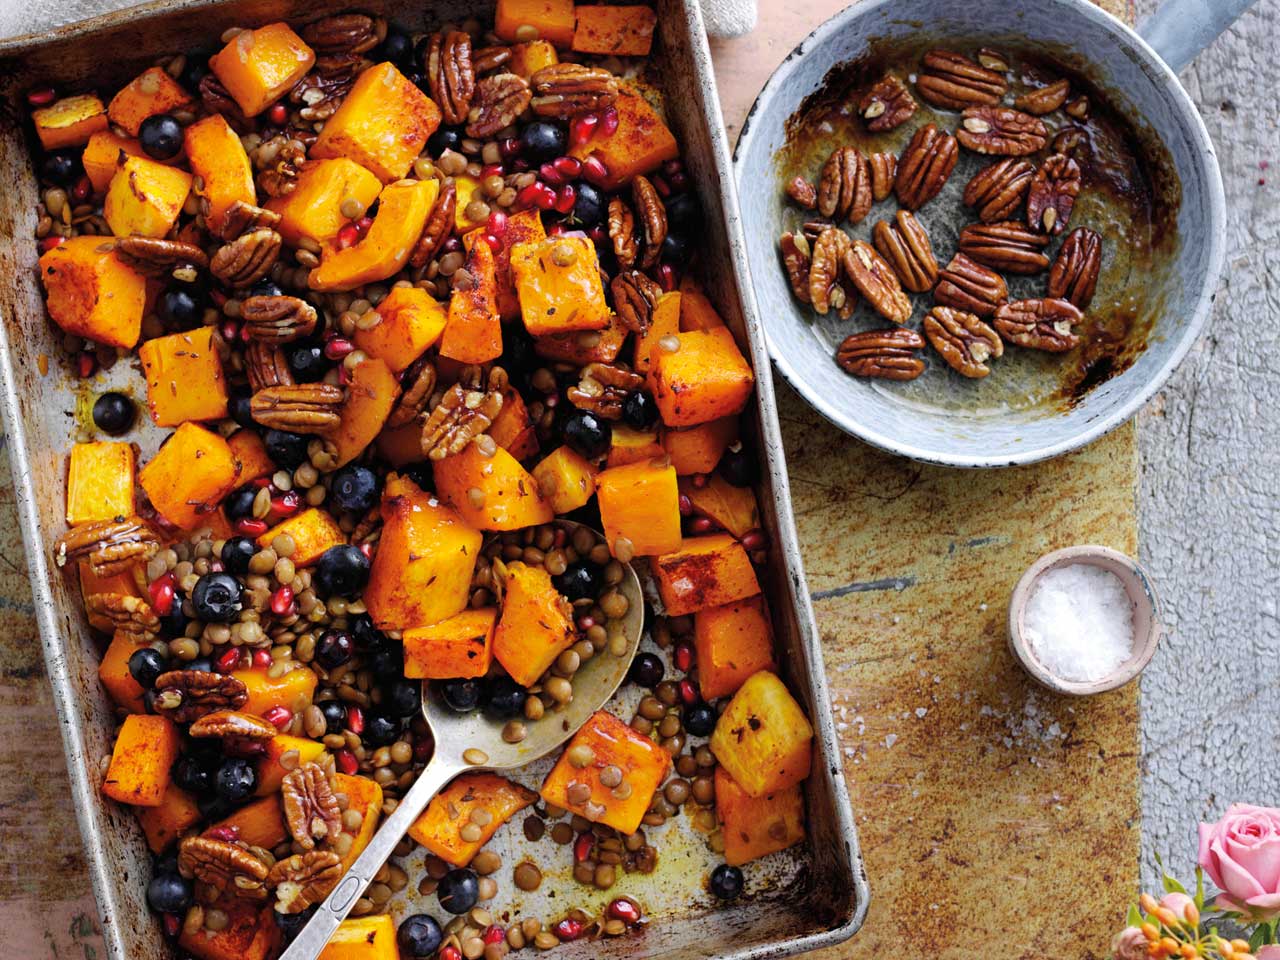 Roasted pumpkin with blueberries and spiced lentils